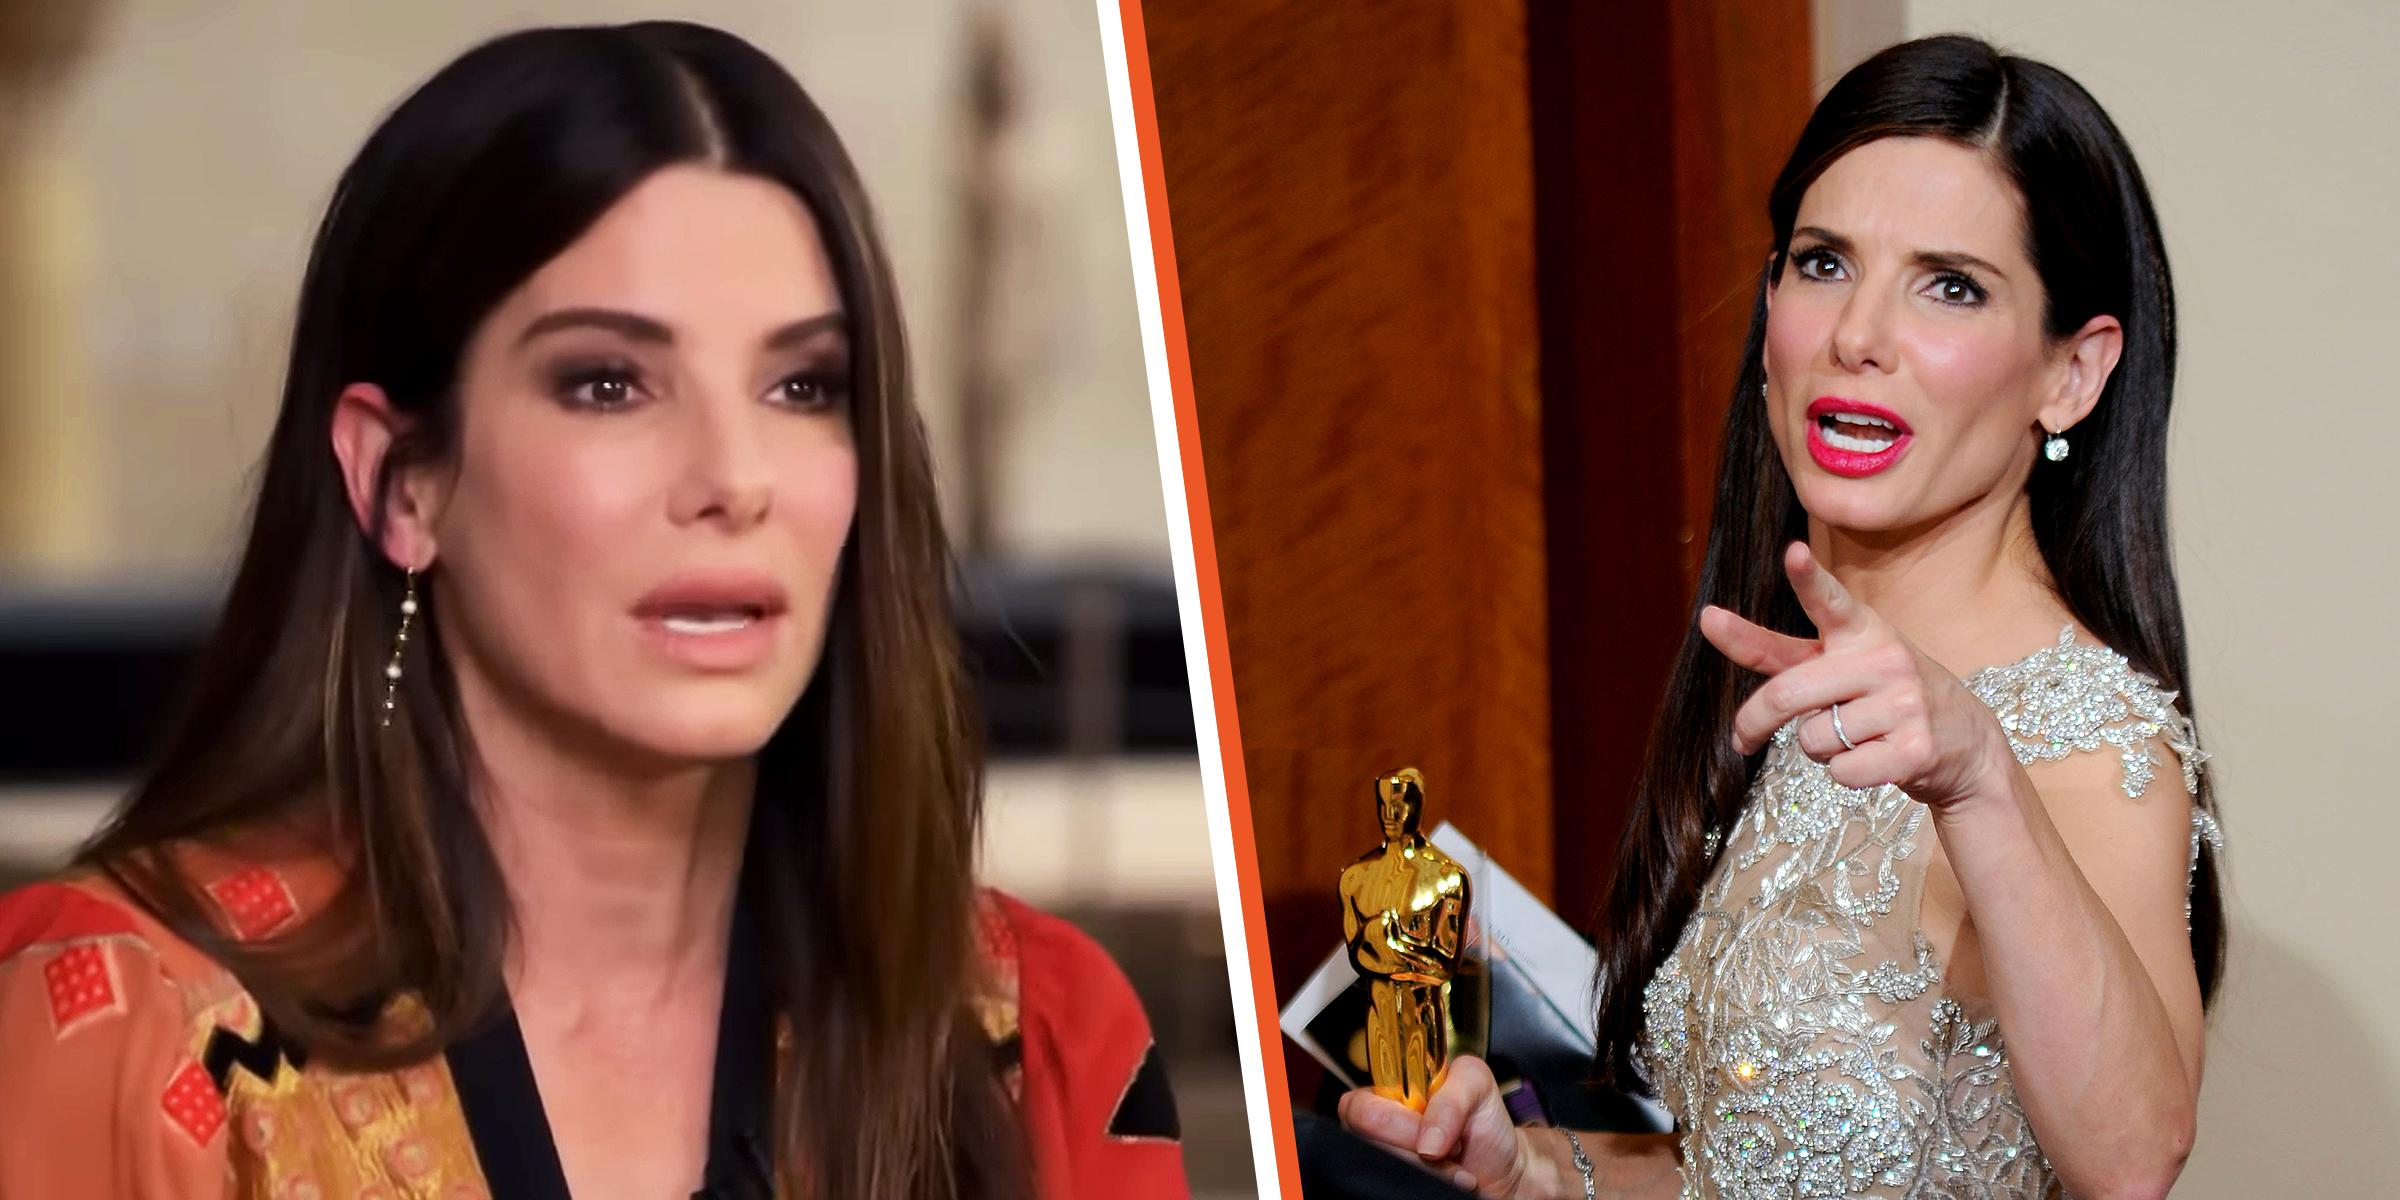 Sandra Bullock | Sources: YouTube/TODAY | Getty Images